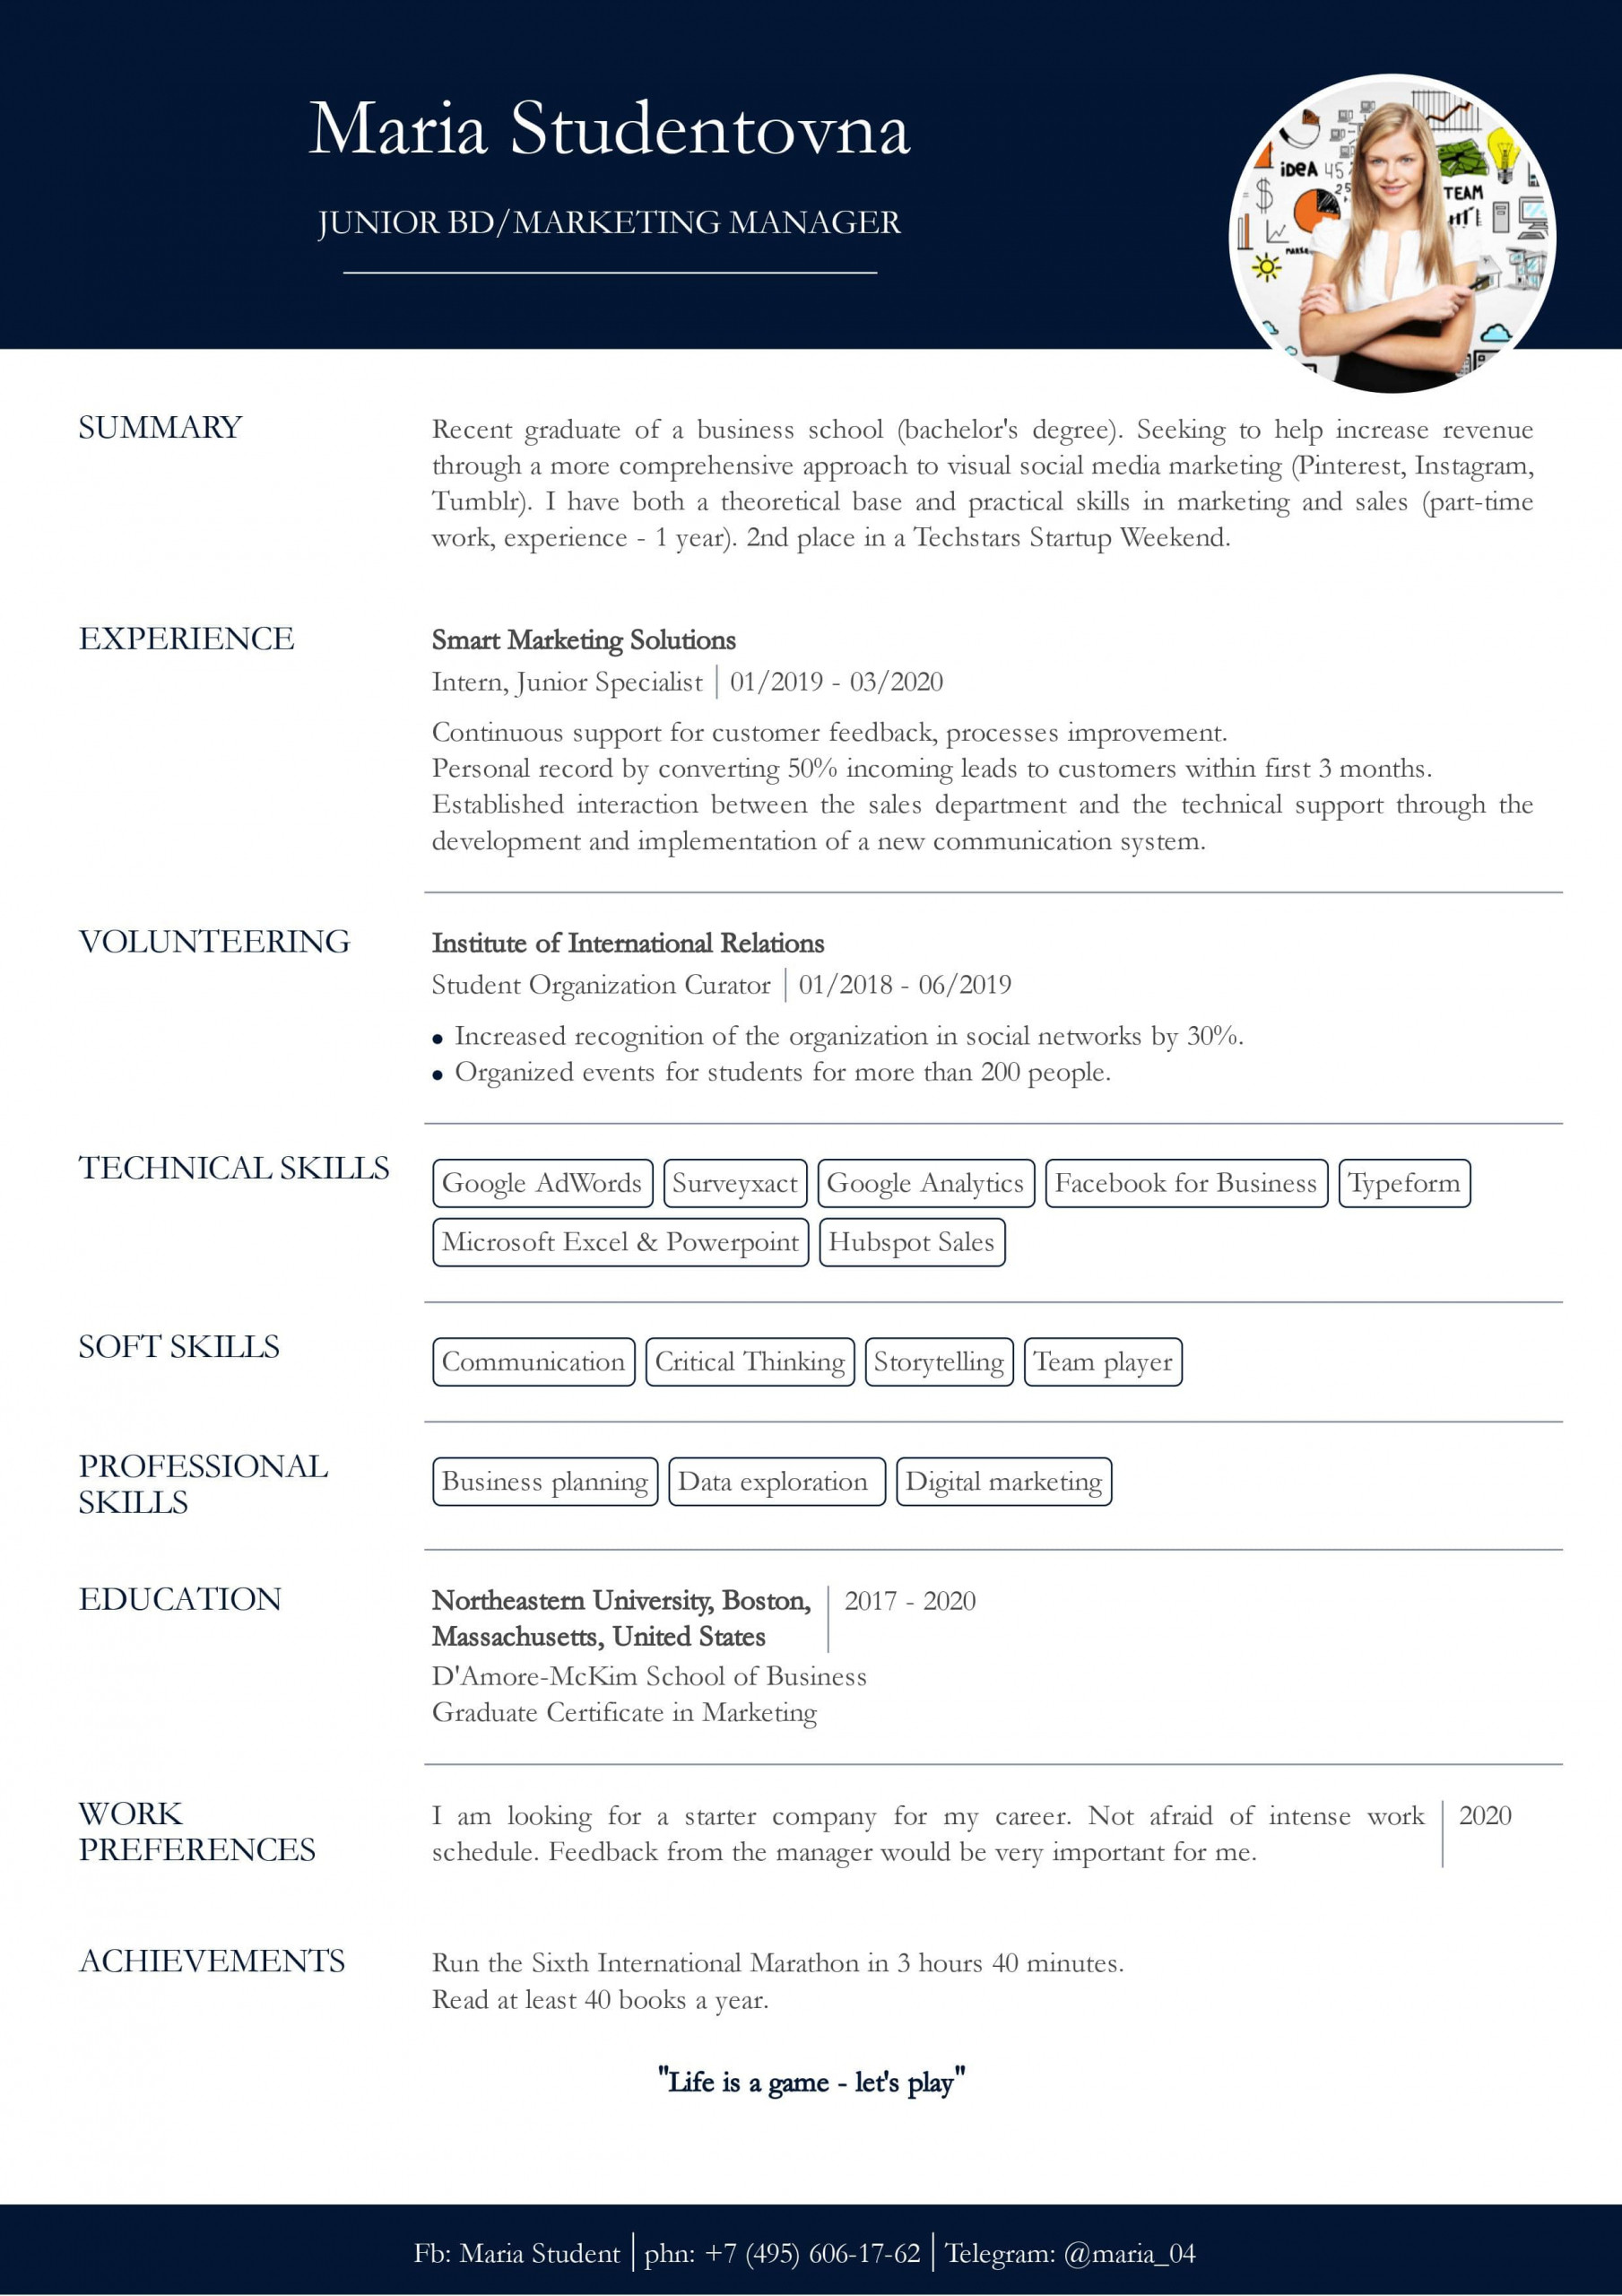 Resume Sample for someone with No Work Experience Resume with No Work Experience. Sample for Students. – Cv2you Blog